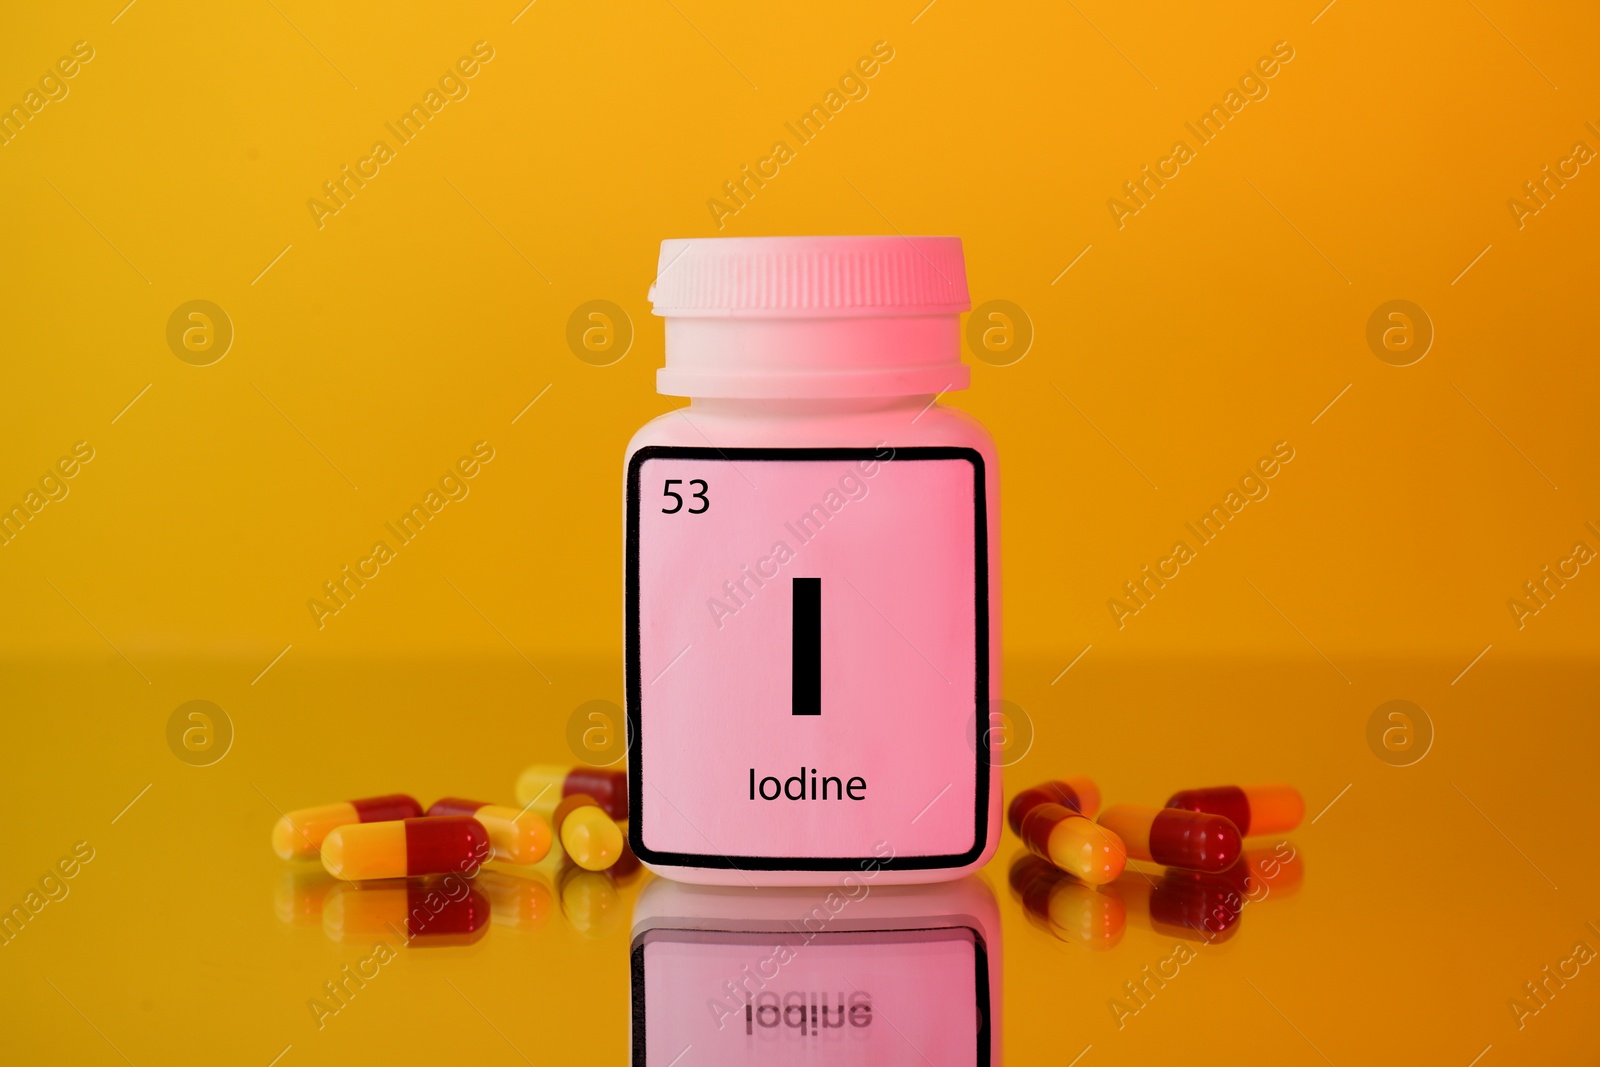 Photo of Bottle of medical iodine and pills on yellow background, color tone effect